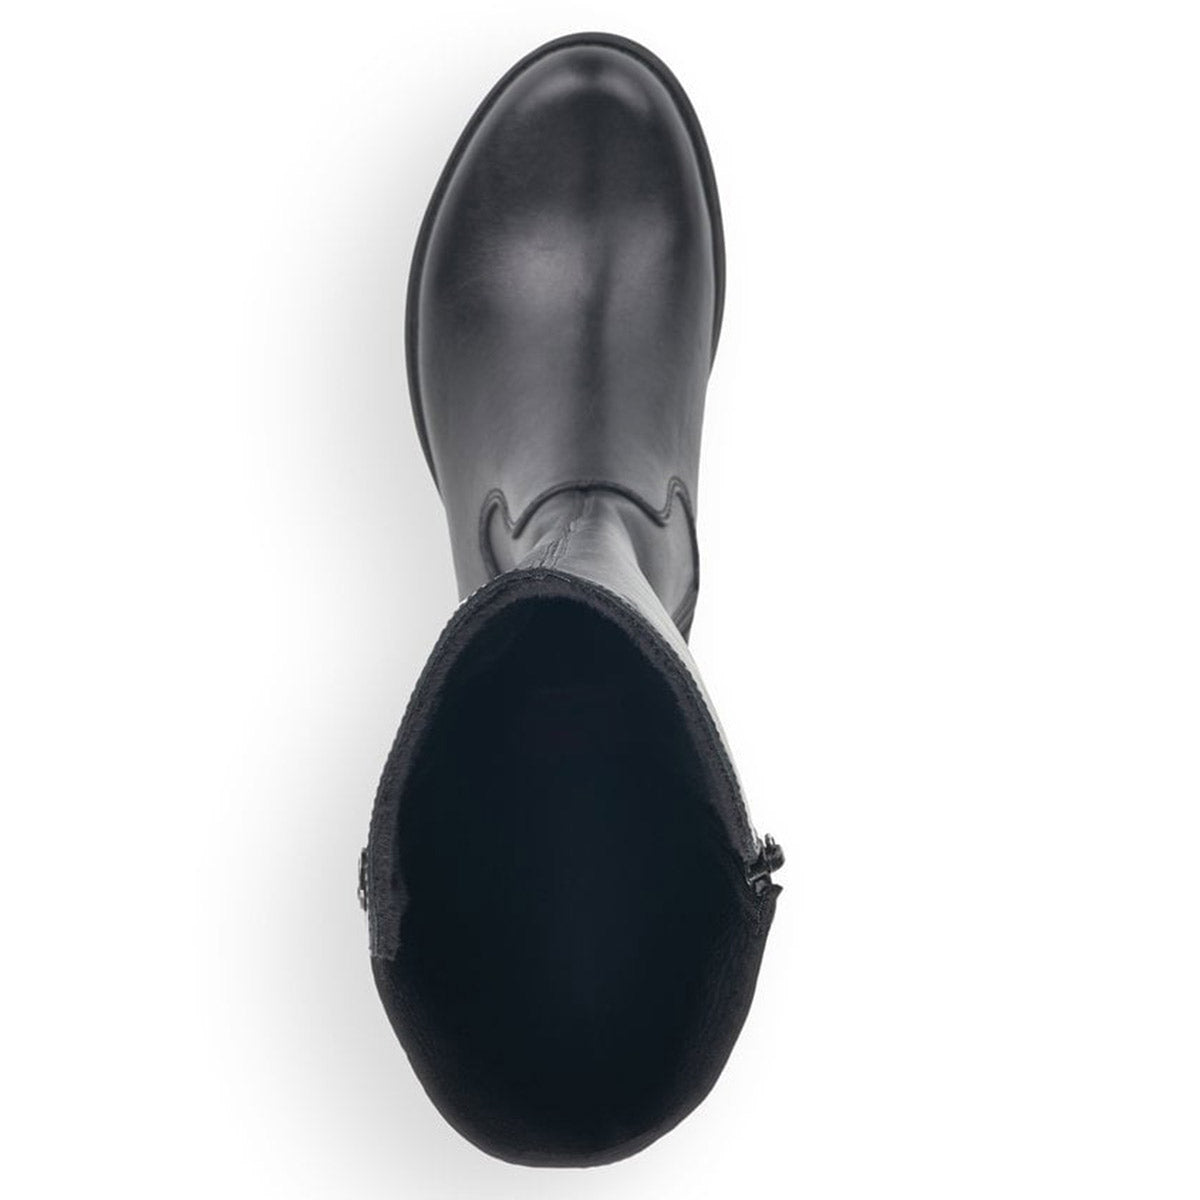 Top view of a single Rieker Faith 91 black vegan leather boot with a zipper, isolated on a white background.